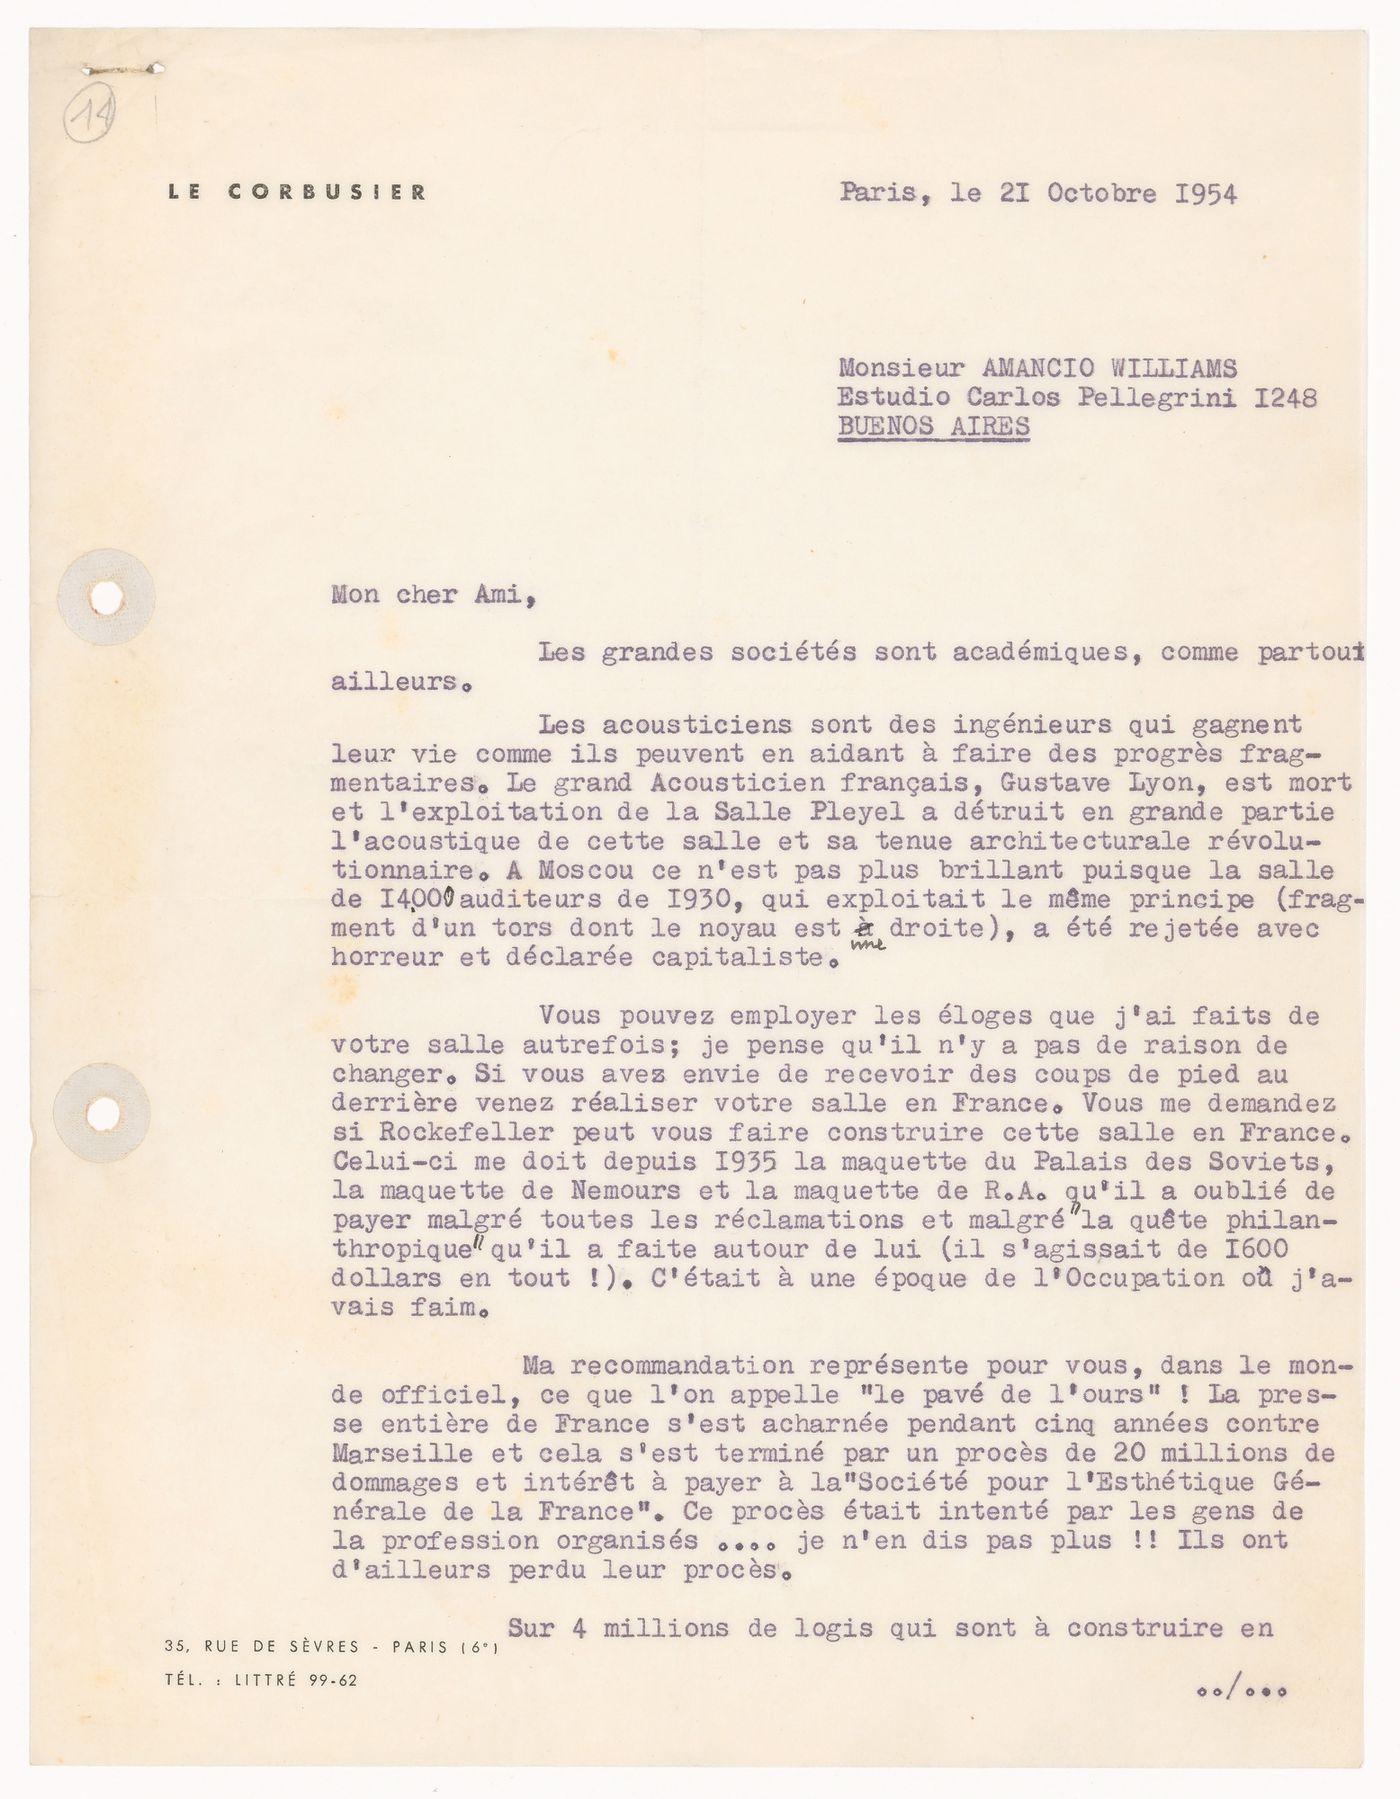 Correspondence, letter to Amancio Williams from Le Corbusier